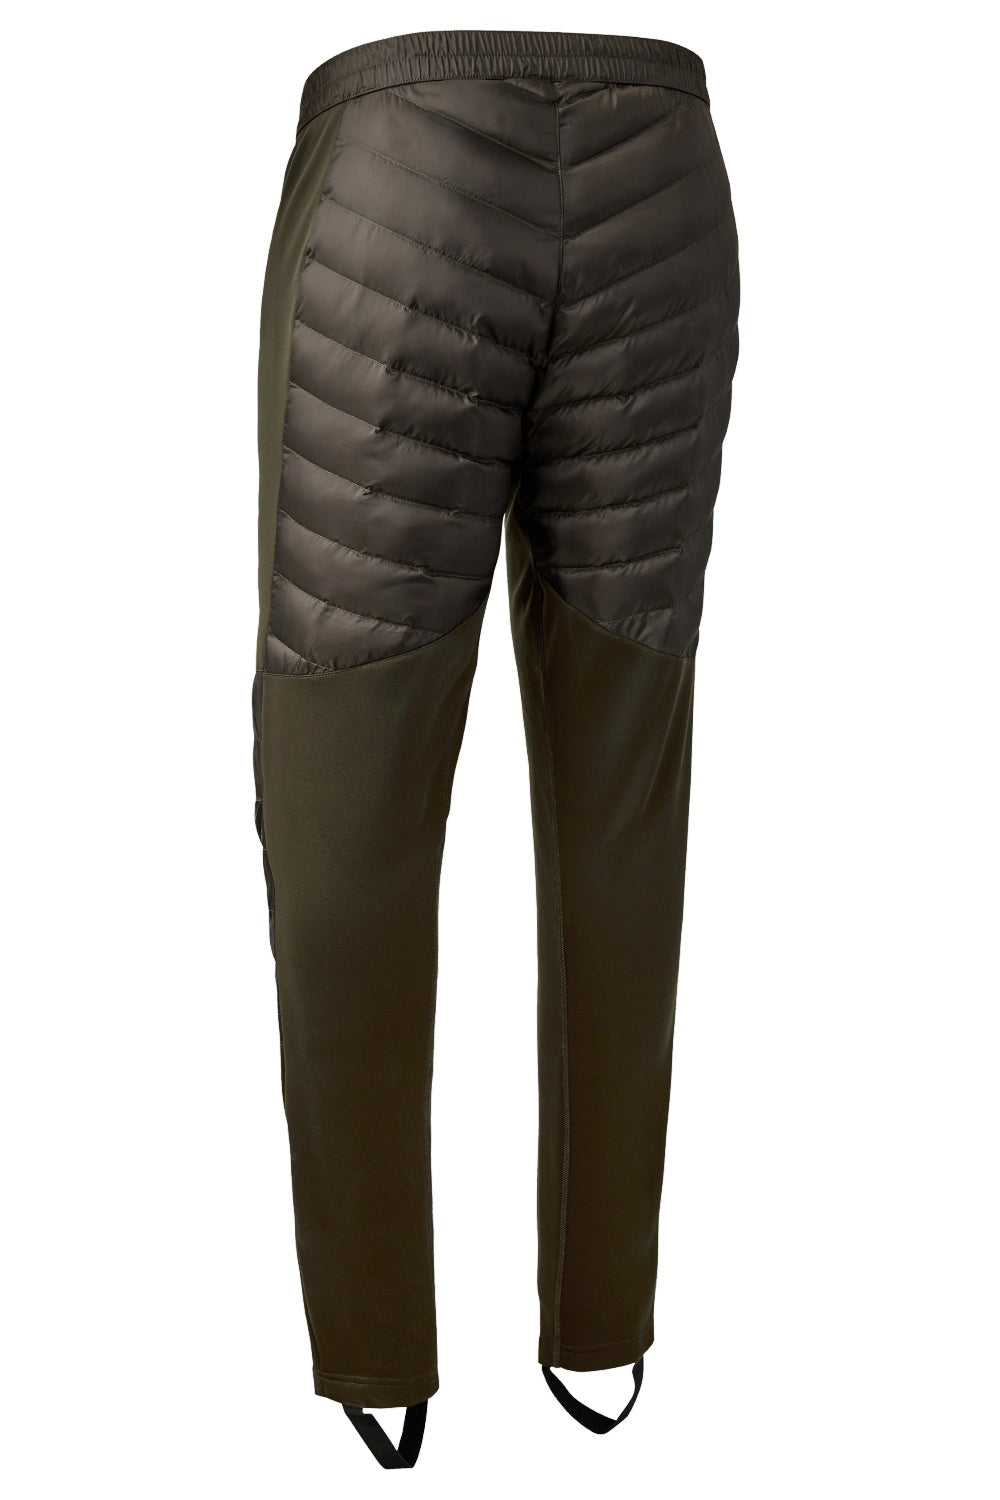 Deerhunter Excape Quilted Trousers in Art Green 